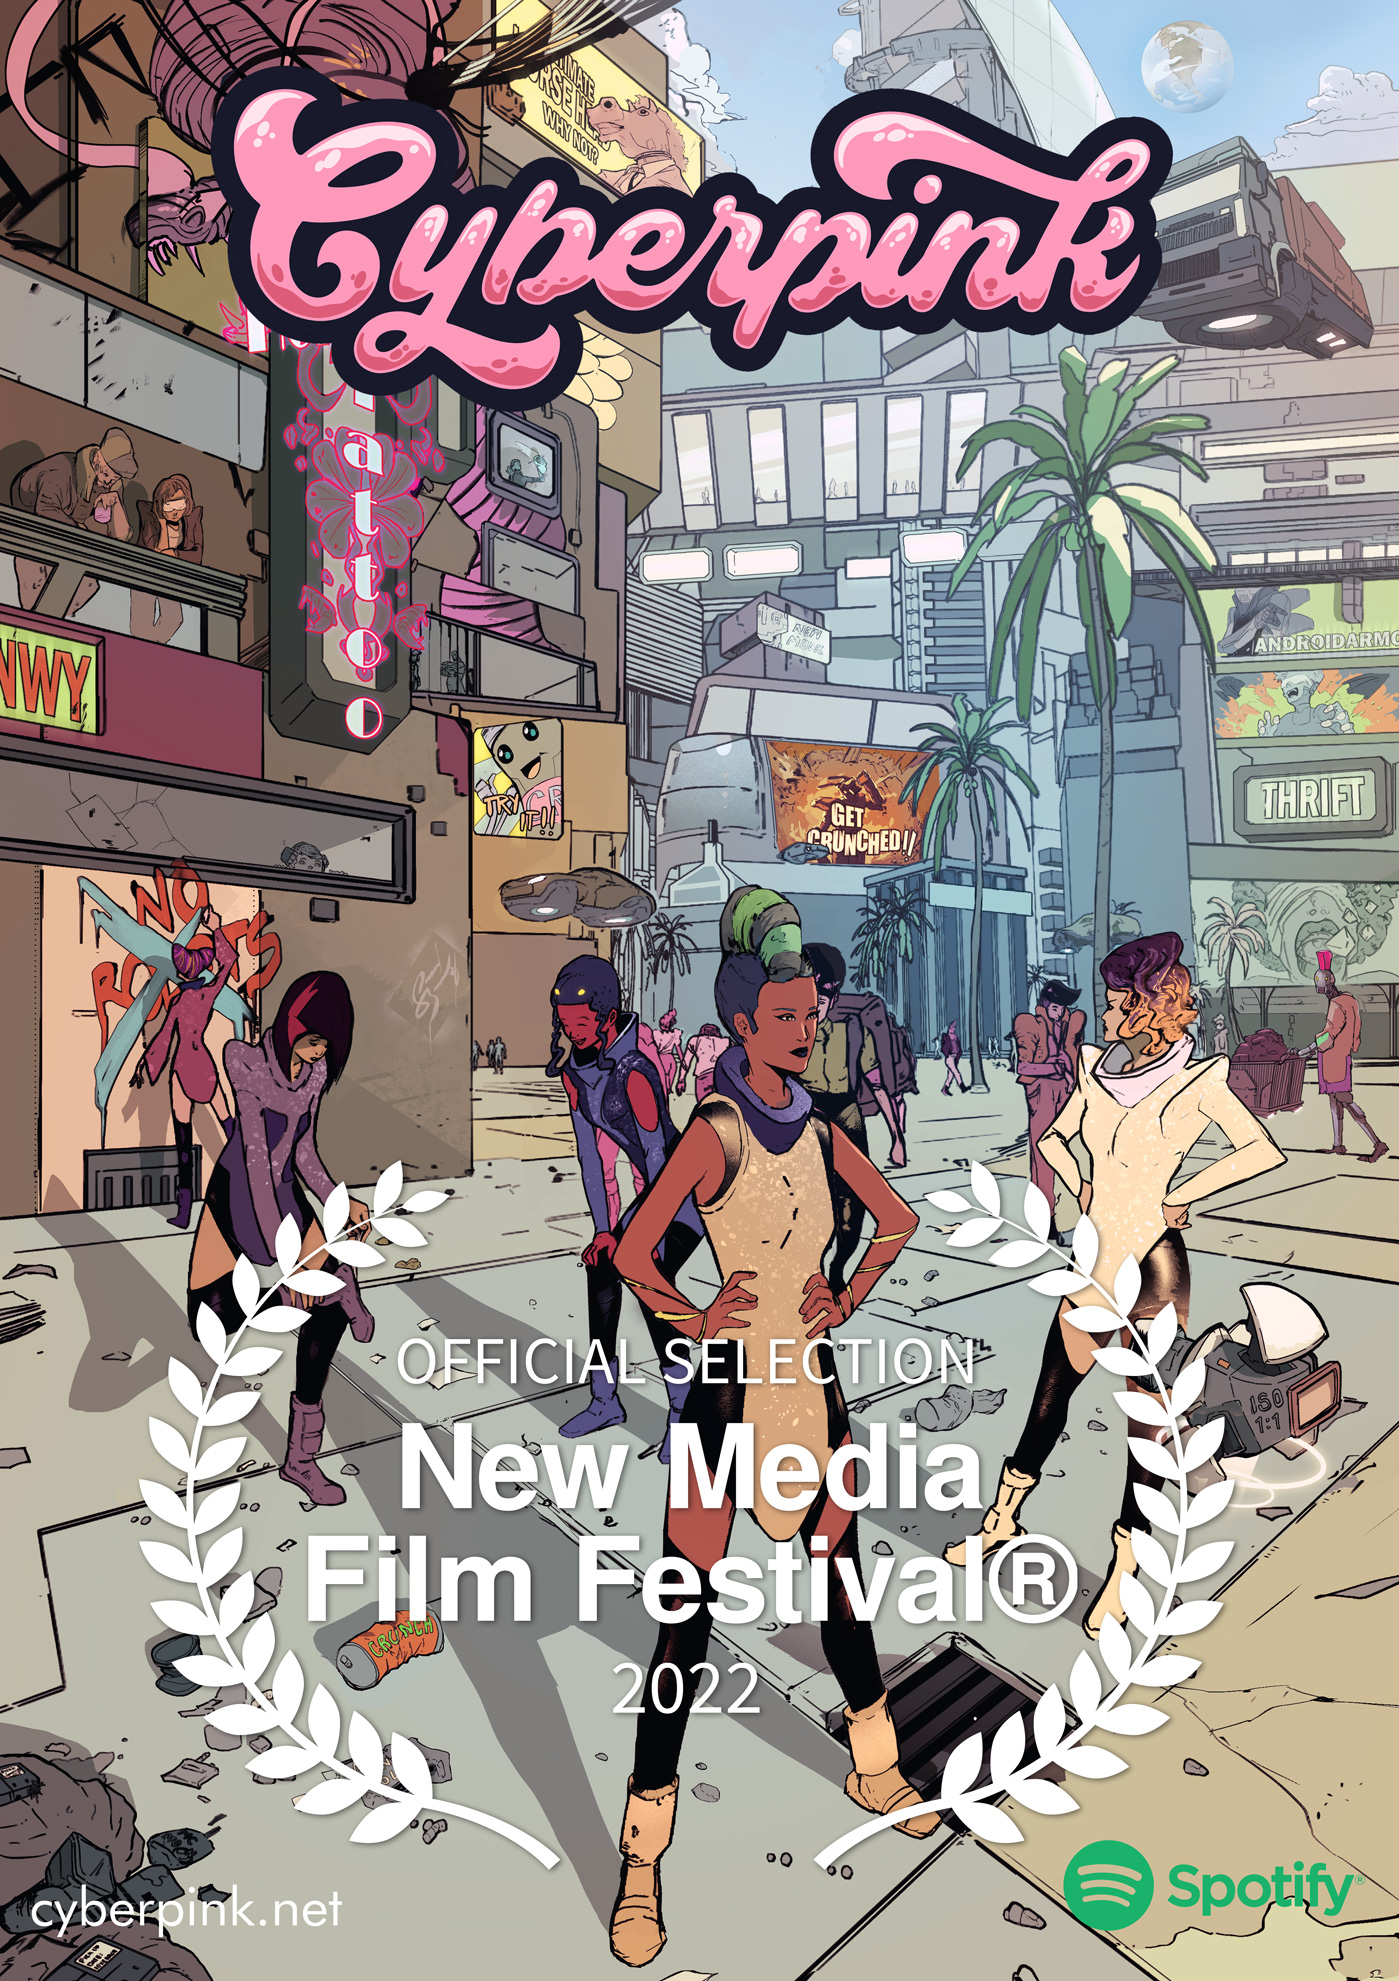 Cyberpink poster for New Media Film Festival